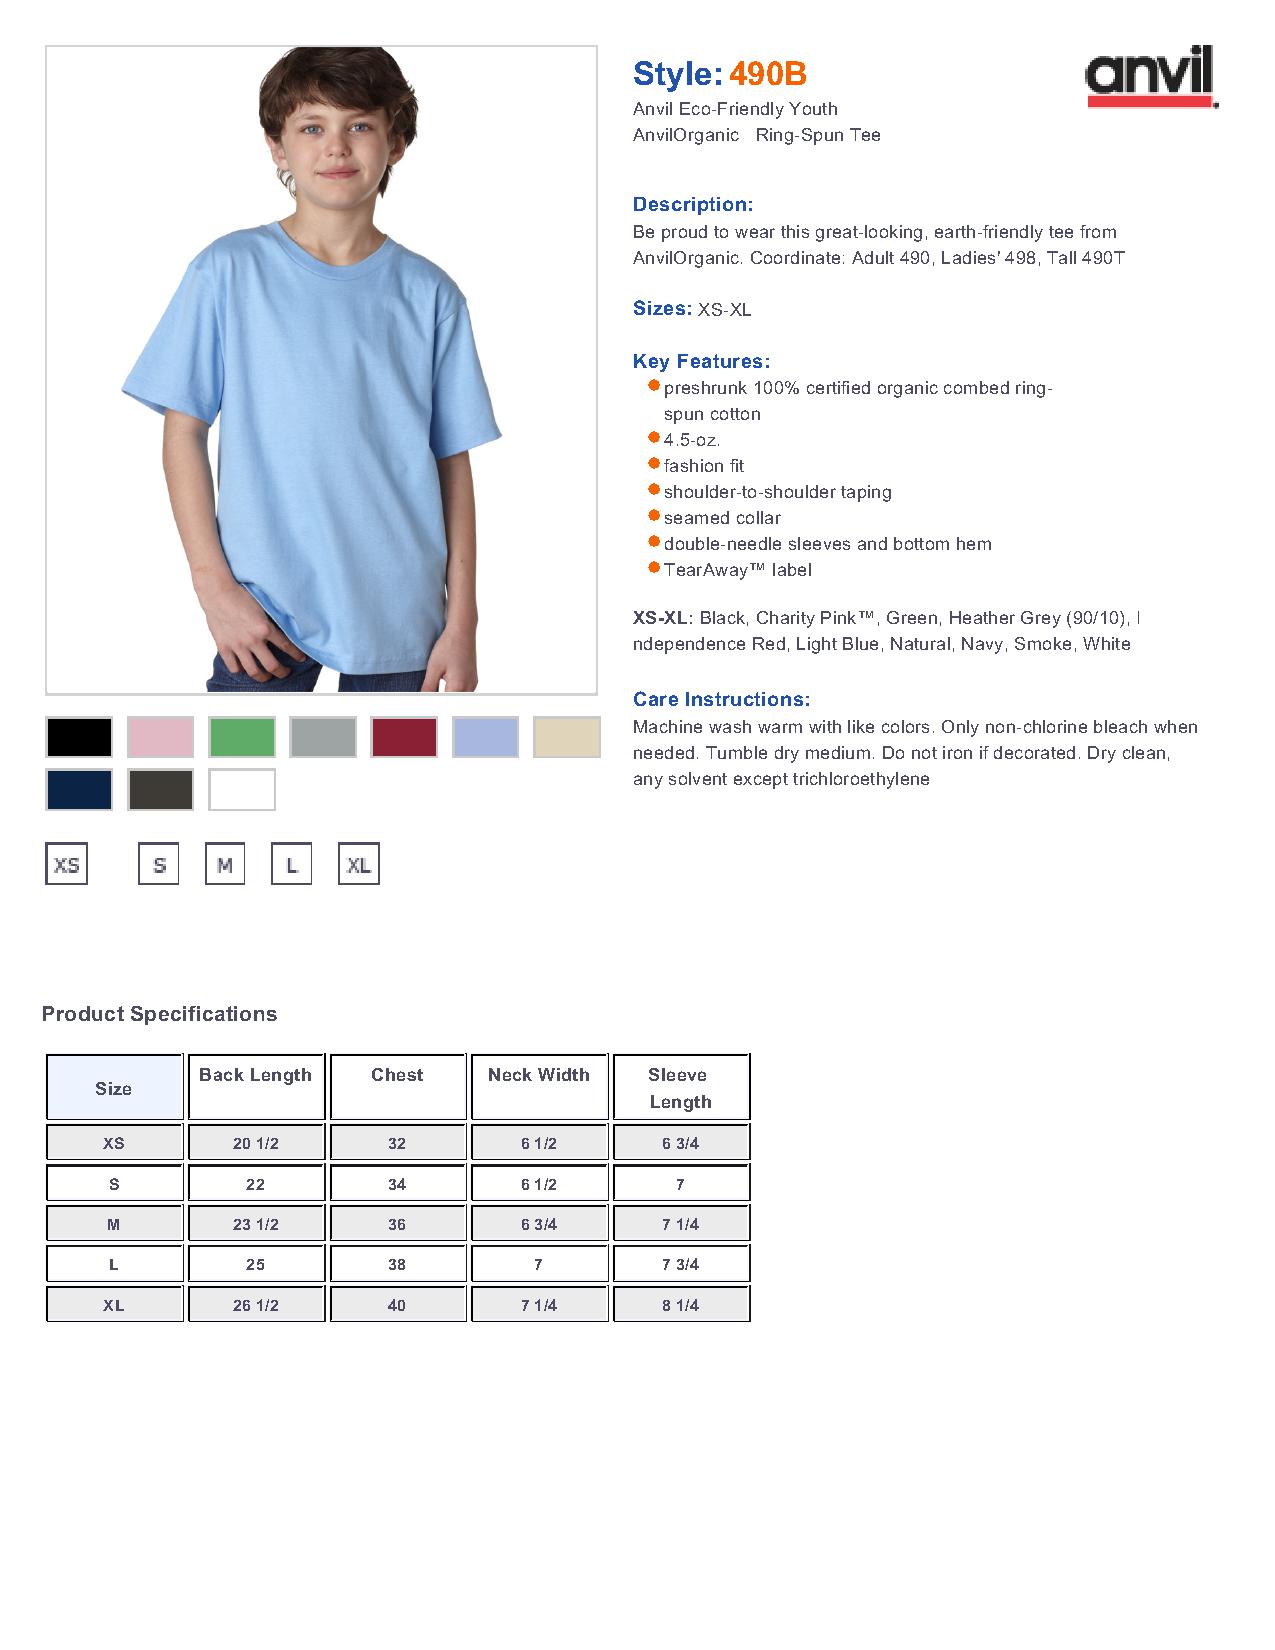 Anvil Youth T Shirt Size Chart